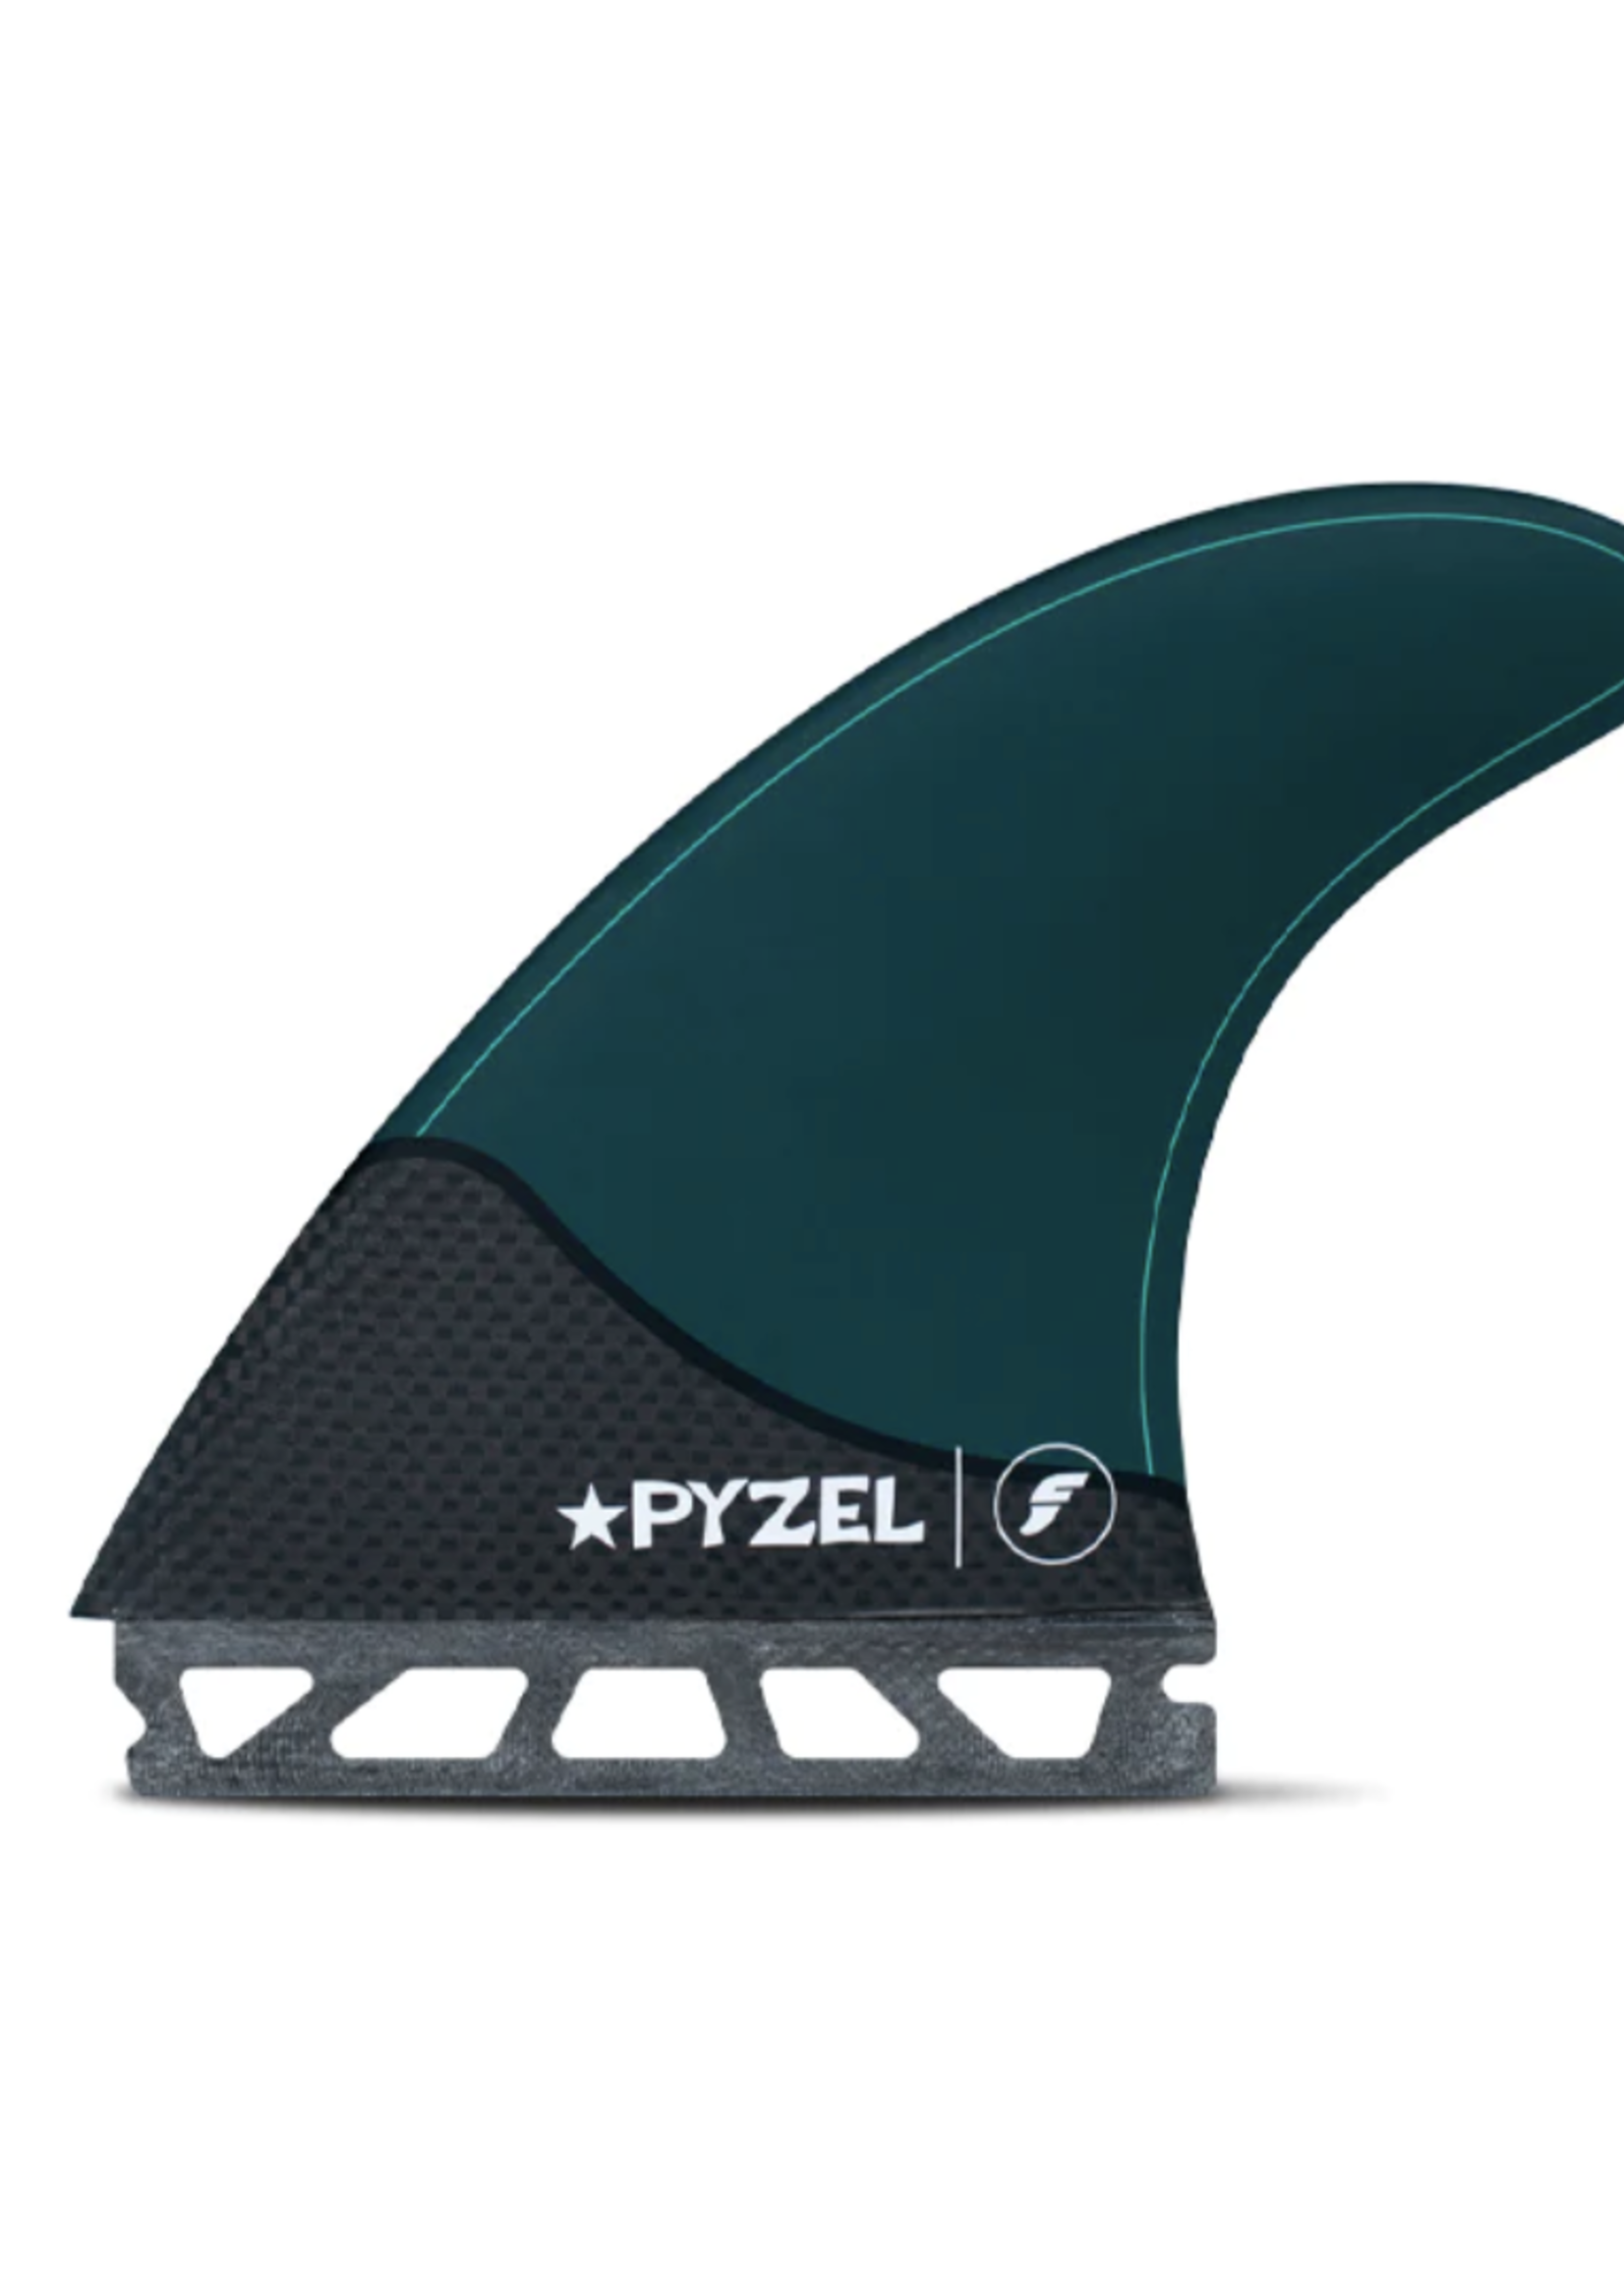 Futures Futures Pyzel Large Thruster Pacific Blue